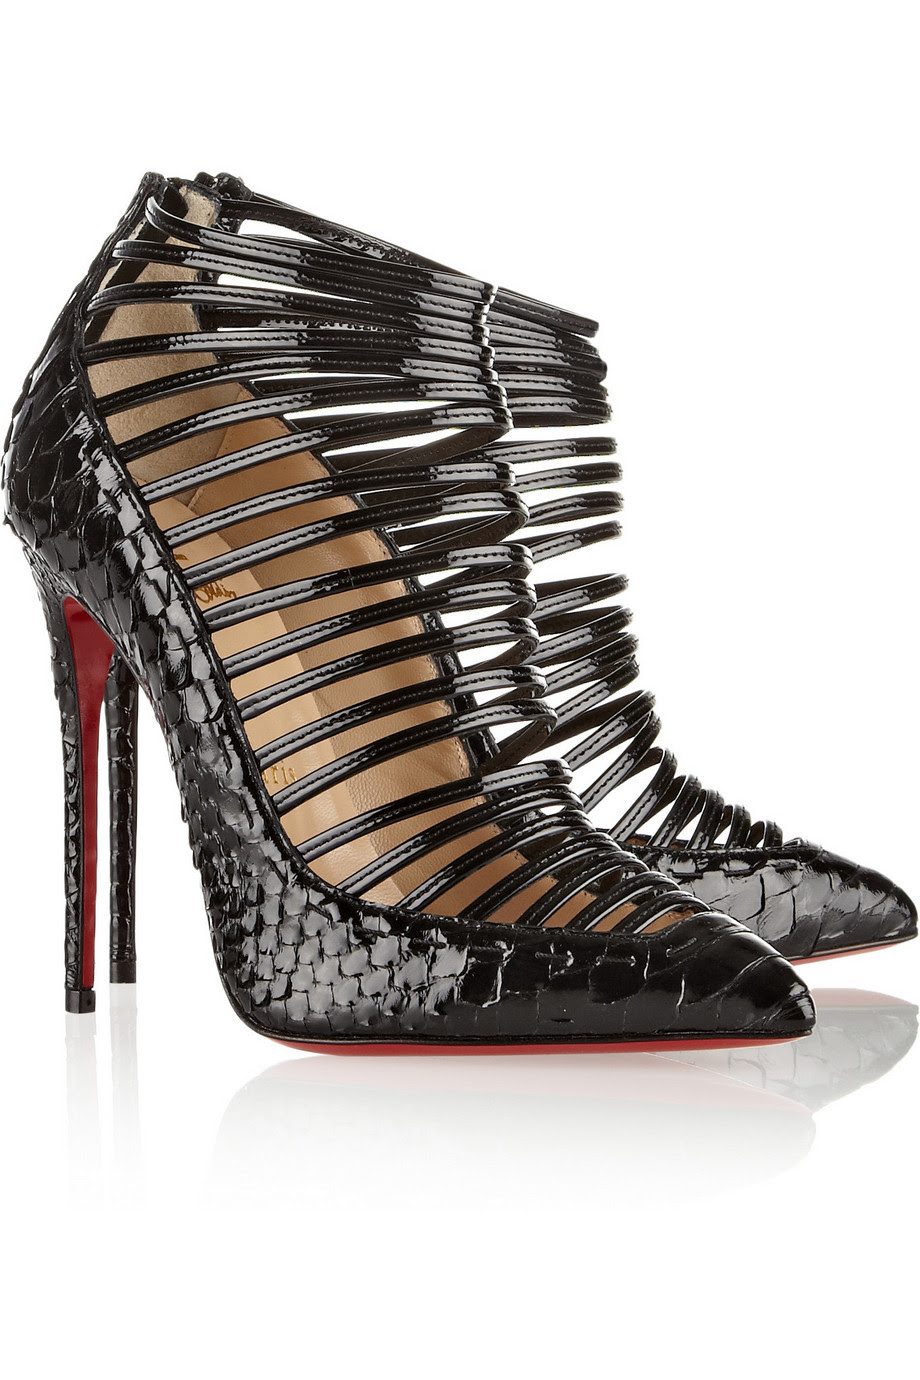 DIARY OF A CLOTHESHORSE: TODAY'S SHOES ARE FROM CHRISTIAN LOUBOUTIN